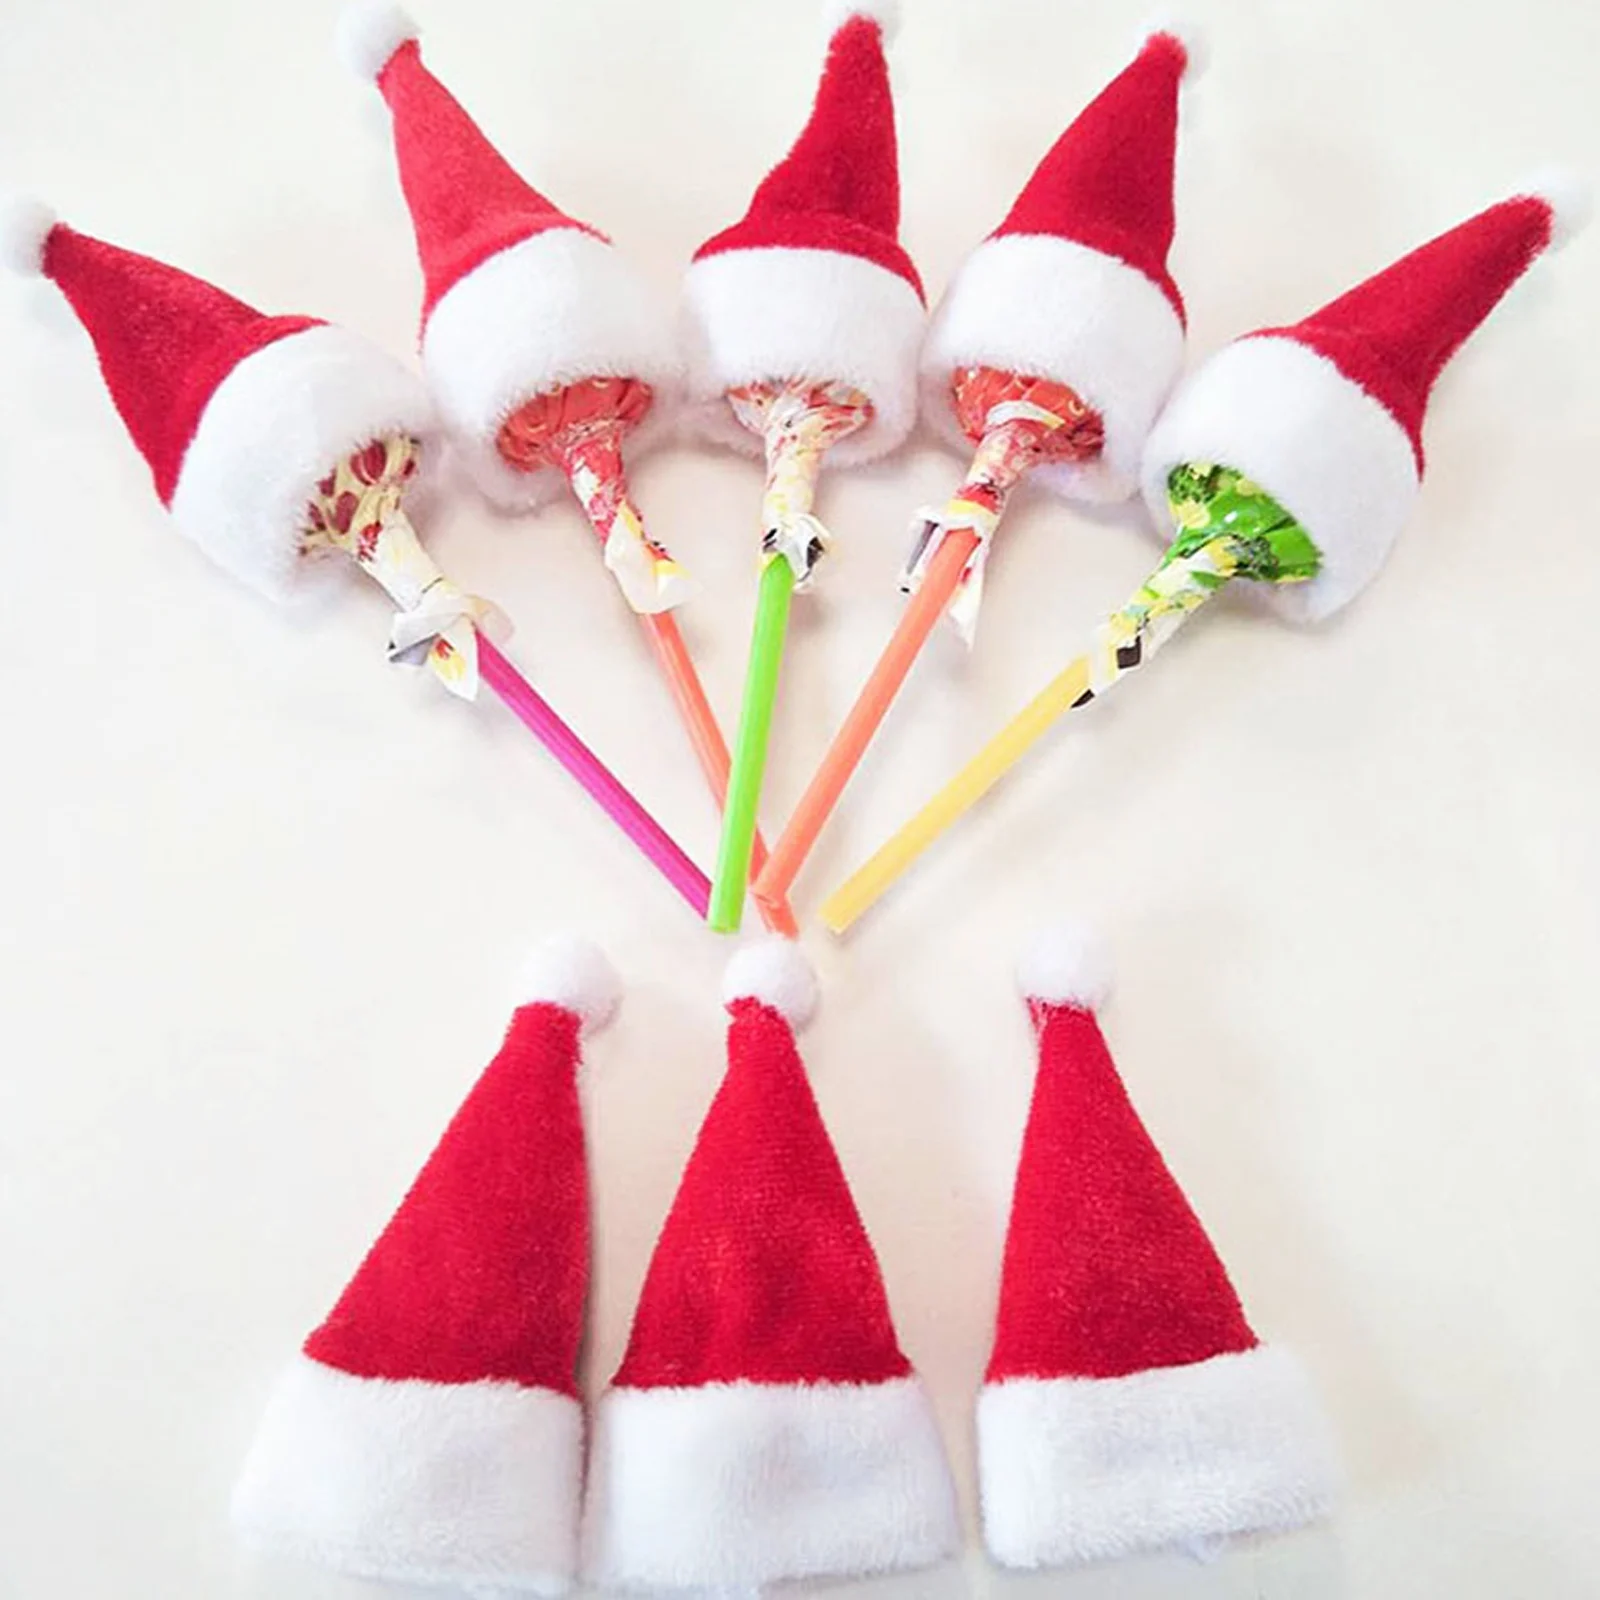 

10Pcs Santa Claus Hat Mini Christmas Hat Lollipop Top Topper Cover Hat for Xmas New Year Festival Party Holiday Decoration